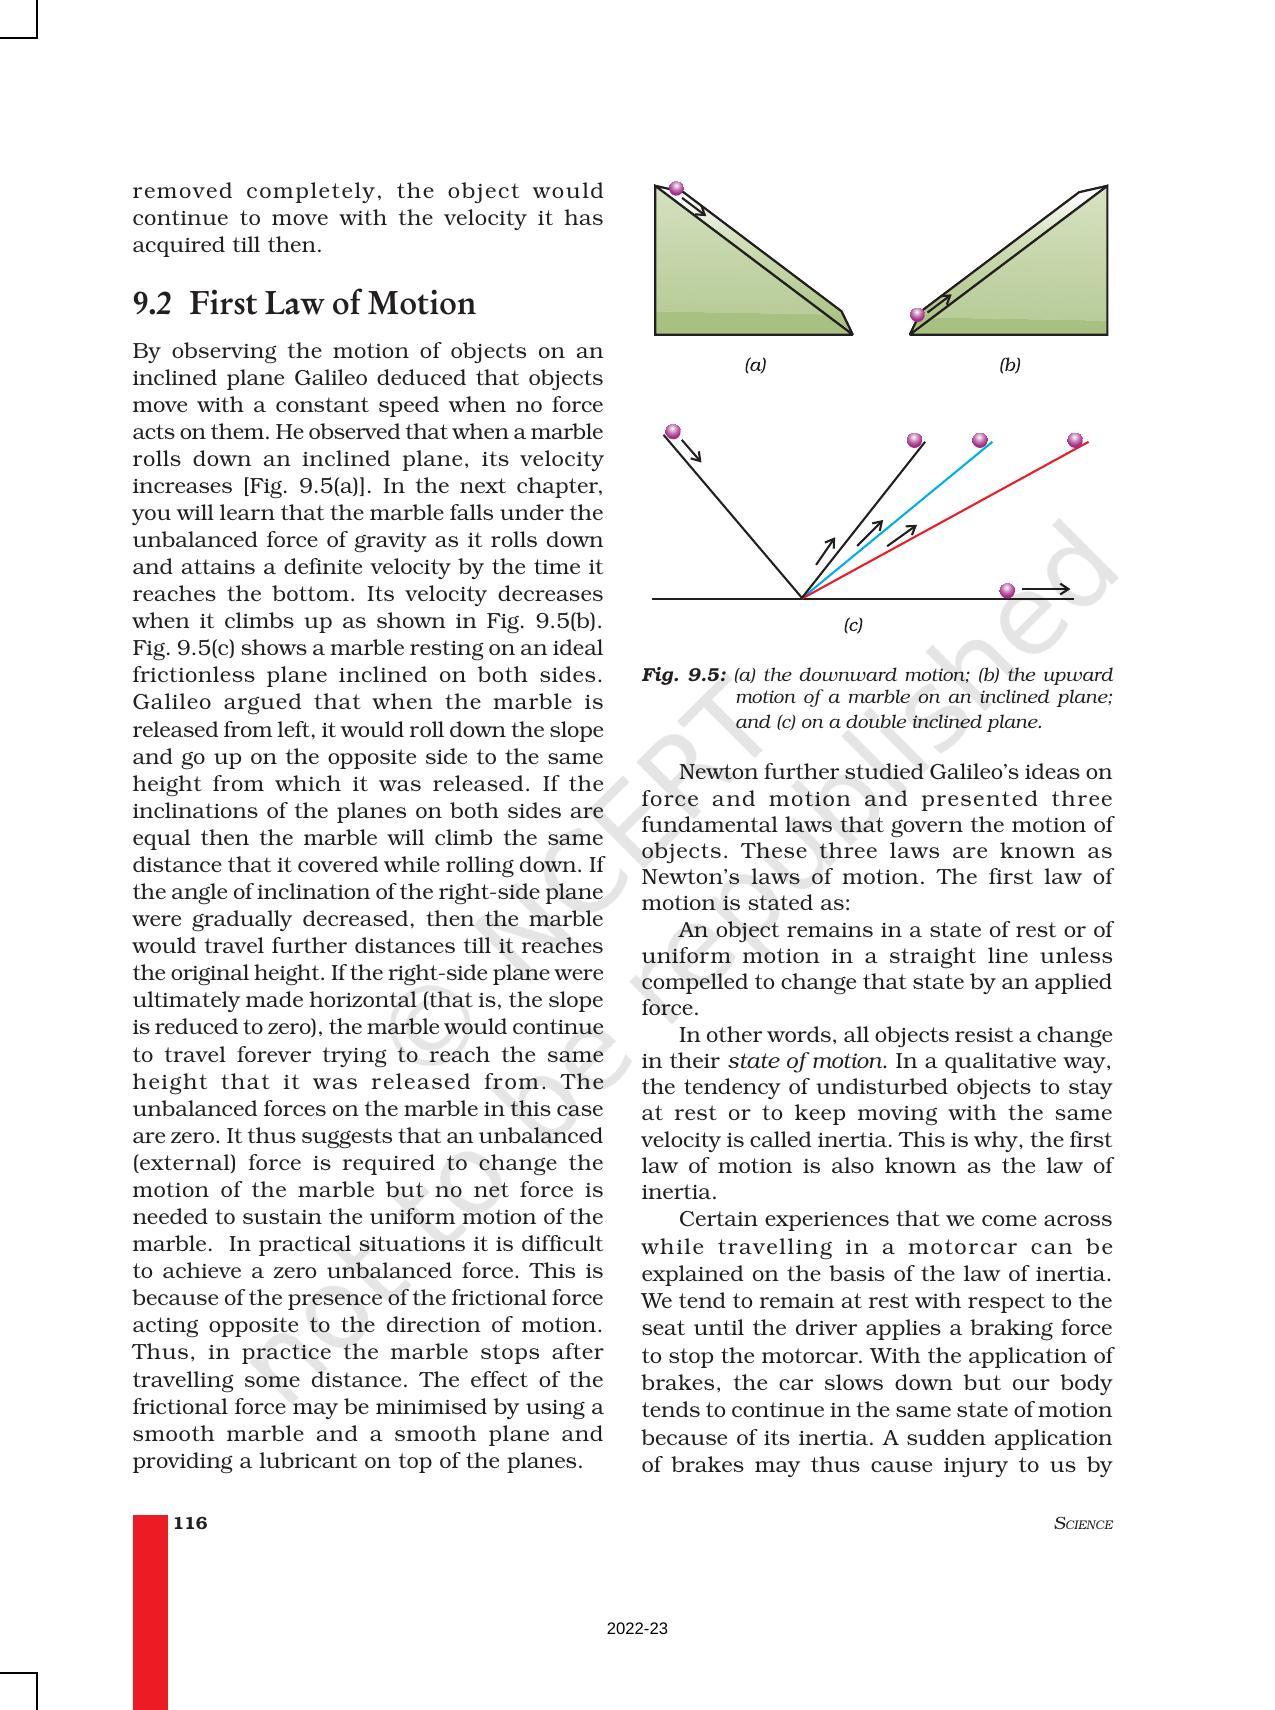 NCERT Book for Class 9 Science Chapter 9 Force And Laws Of Motion - Page 3